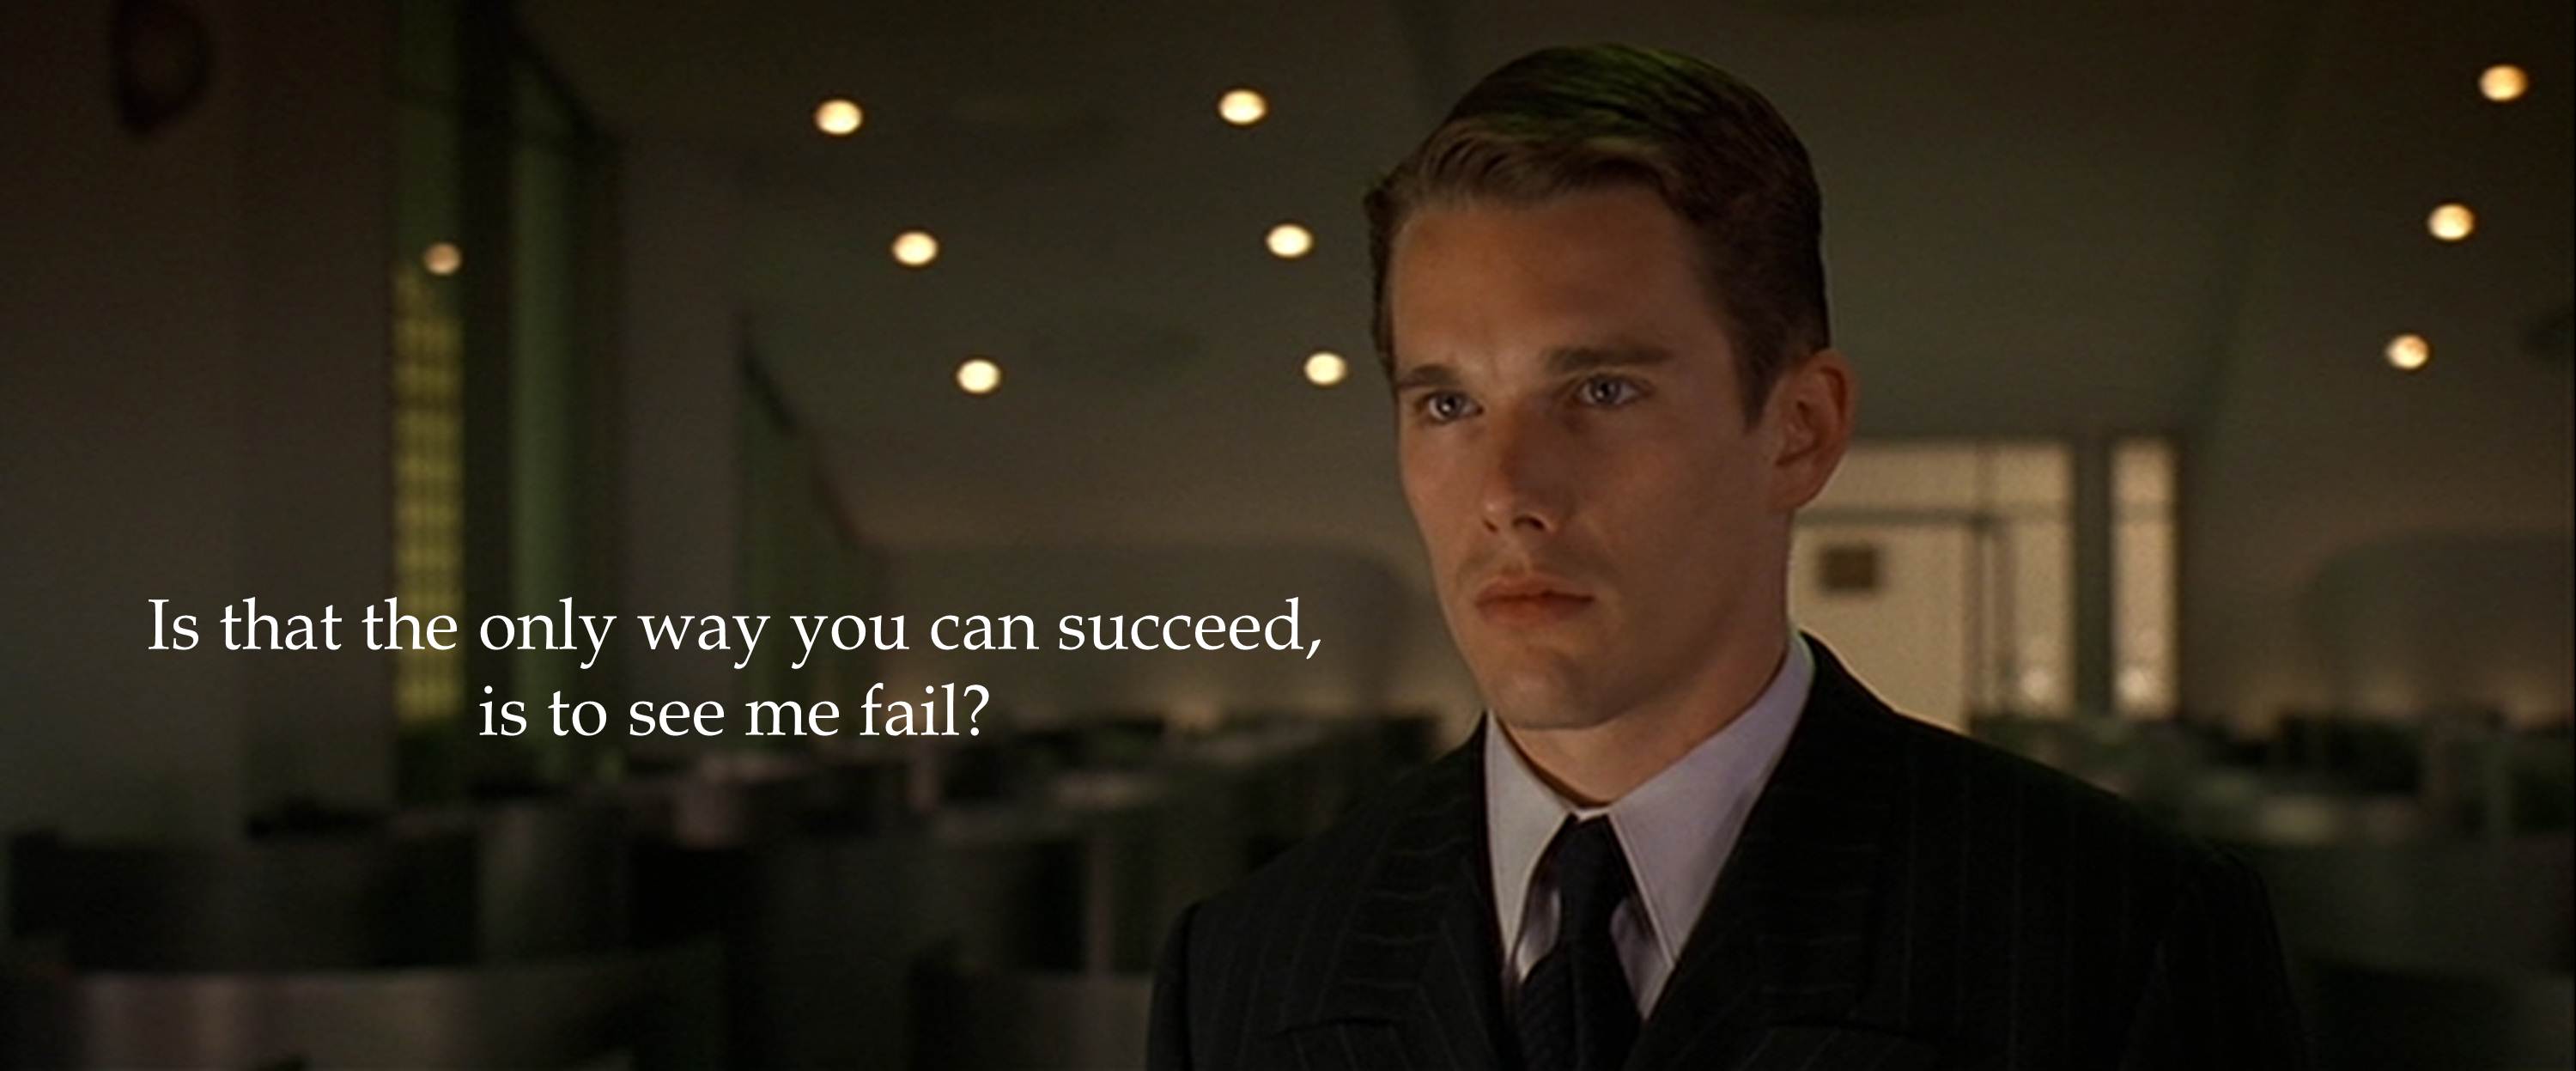 The Following Quotes Are From Gattaca Of The Most Inspiring Sci Fi Movies And Also One Of My Favourites